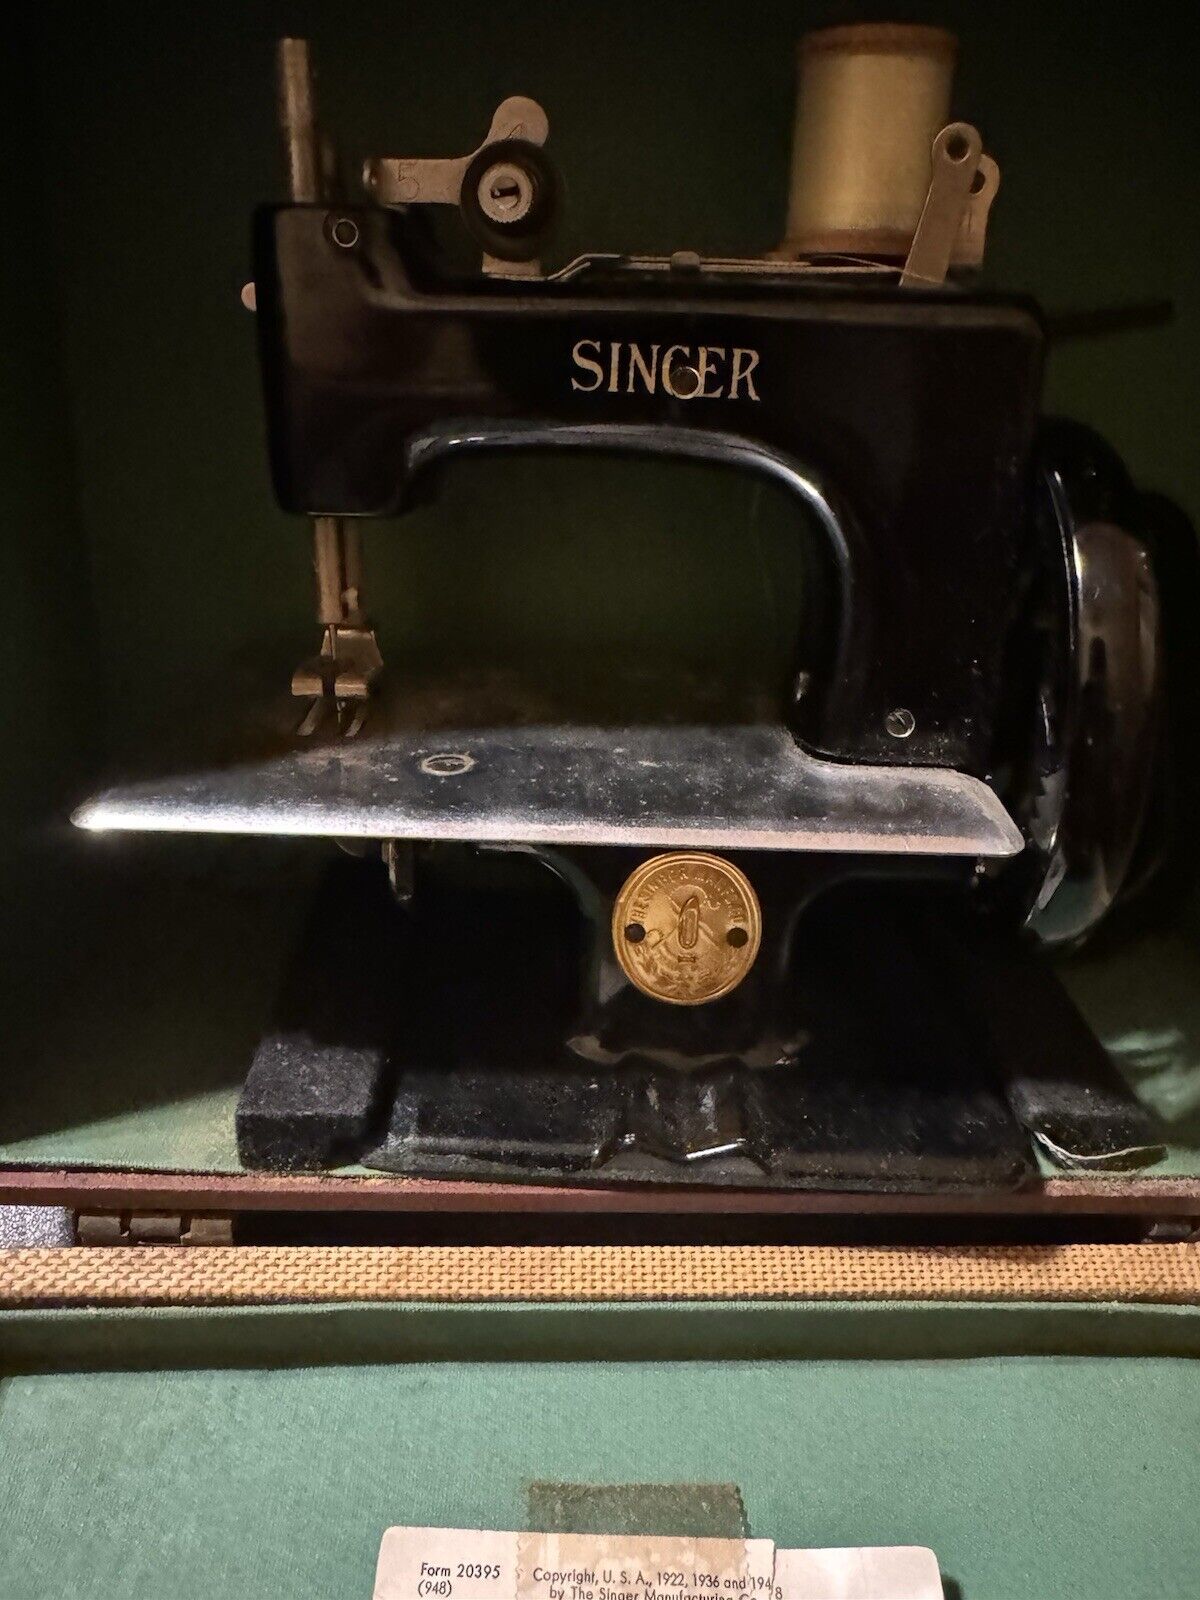 SINGER SEW HANDY Model 20-10 - With clamp, instructions, carrying case